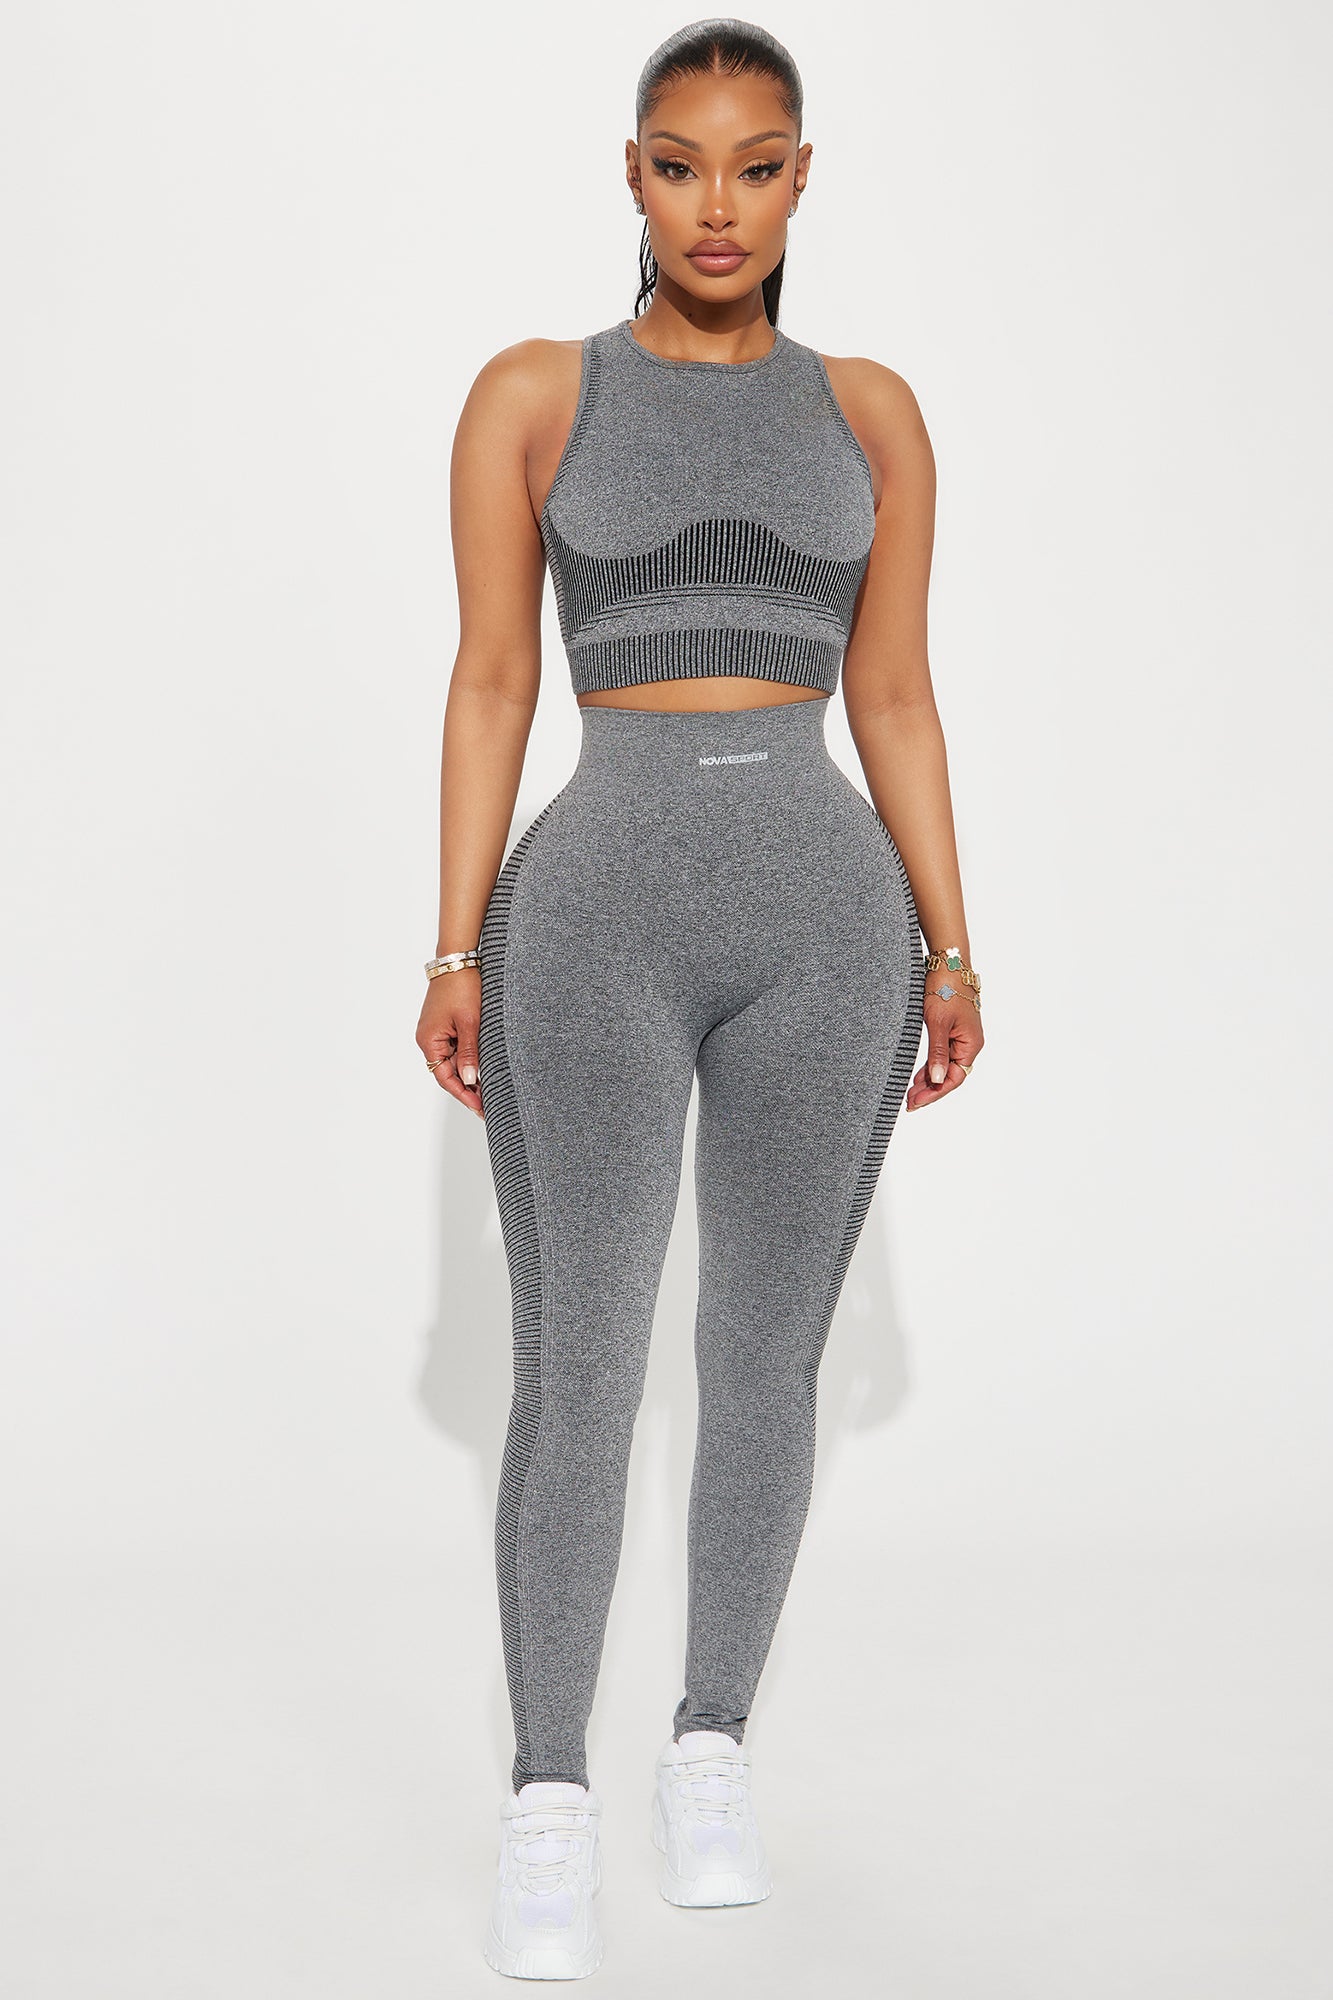 Forever 21 Women's Active Heathered Flare Leggings in Heather Grey